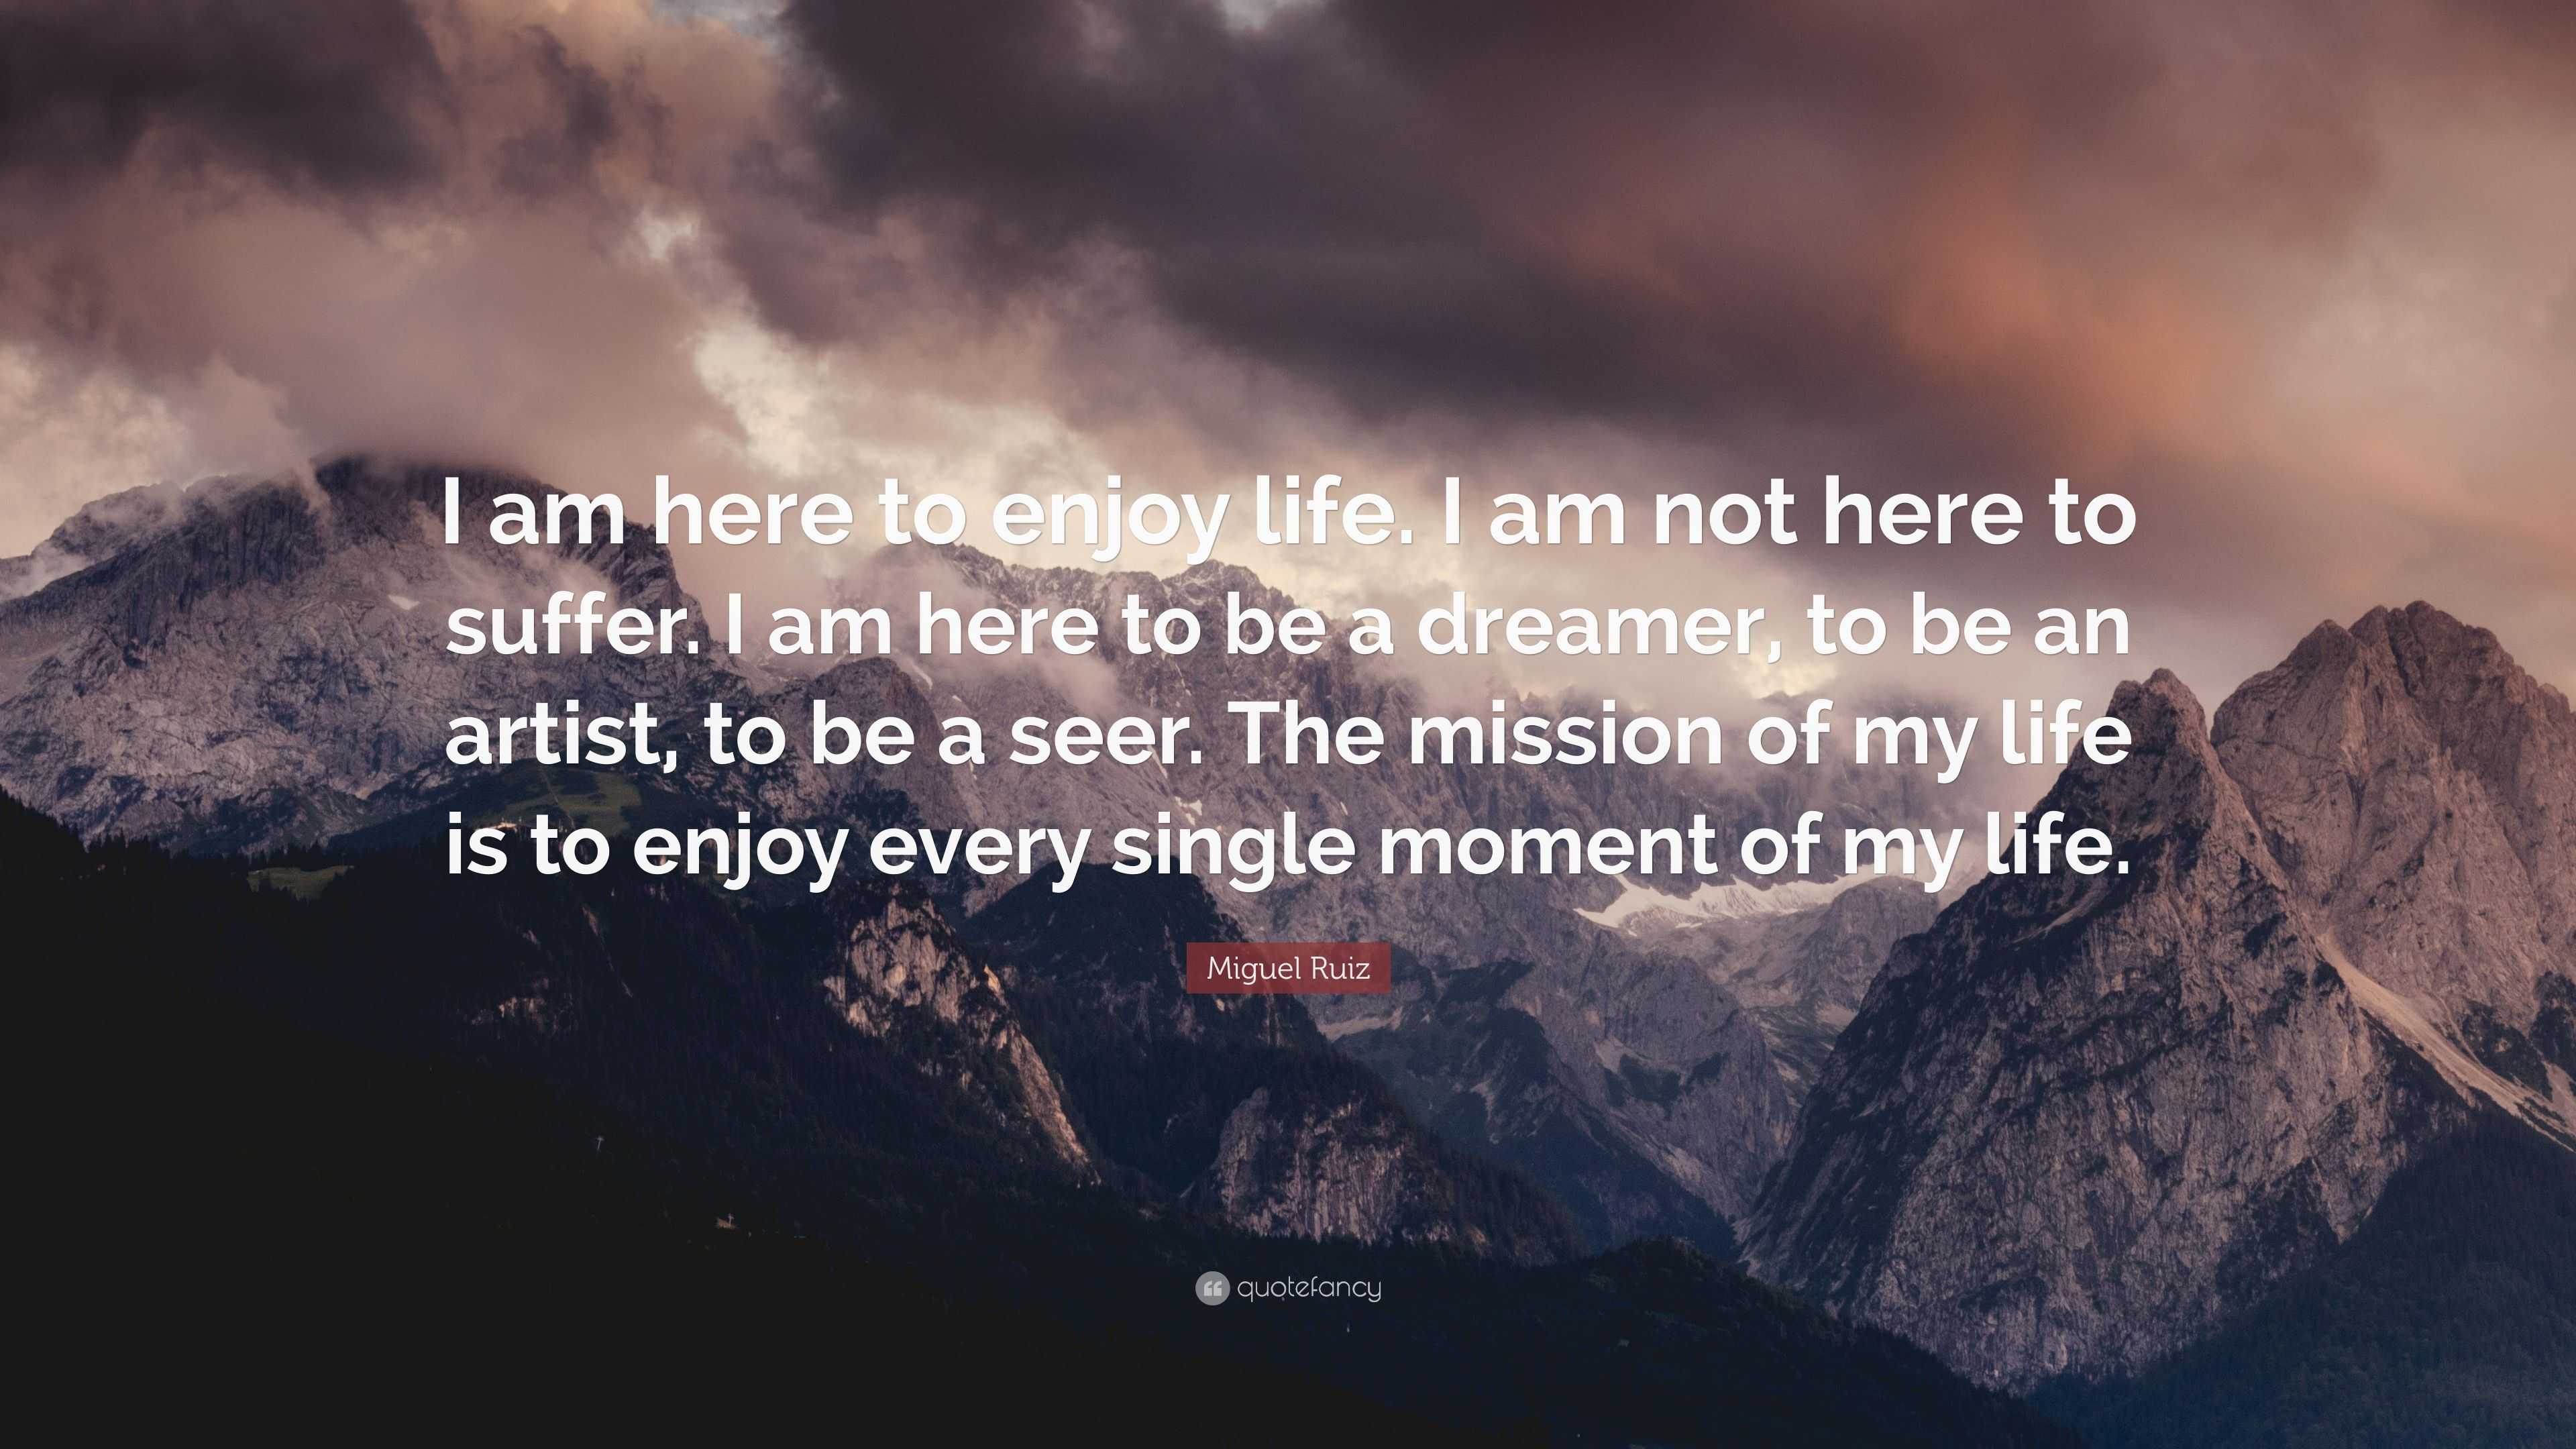 Miguel Ruiz Quote “I am here to enjoy life I am not here